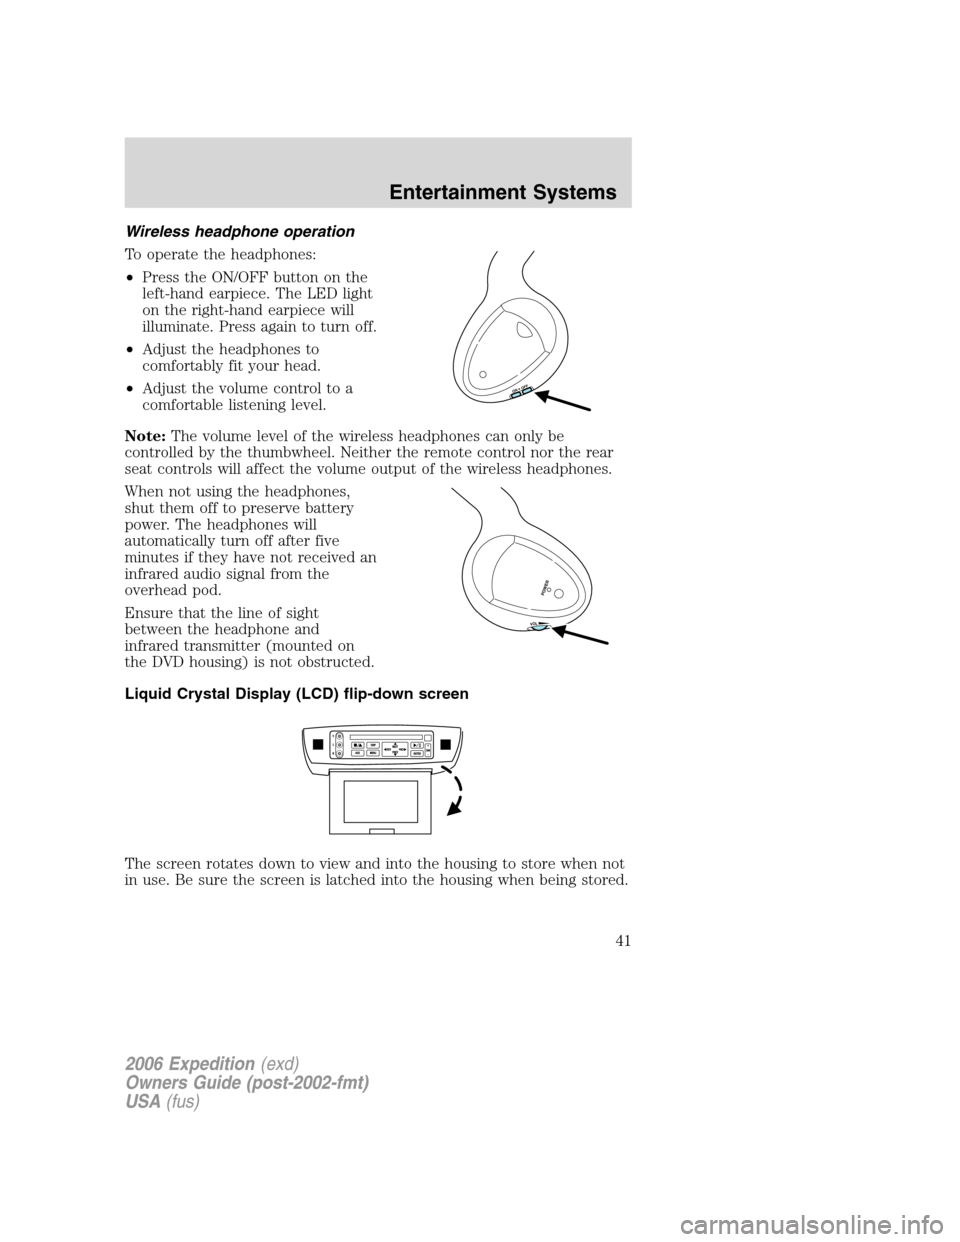 FORD EXPEDITION 2006 2.G Owners Manual Wireless headphone operation
To operate the headphones:
•Press the ON/OFF button on the
left-hand earpiece. The LED light
on the right-hand earpiece will
illuminate. Press again to turn off.
•Adju